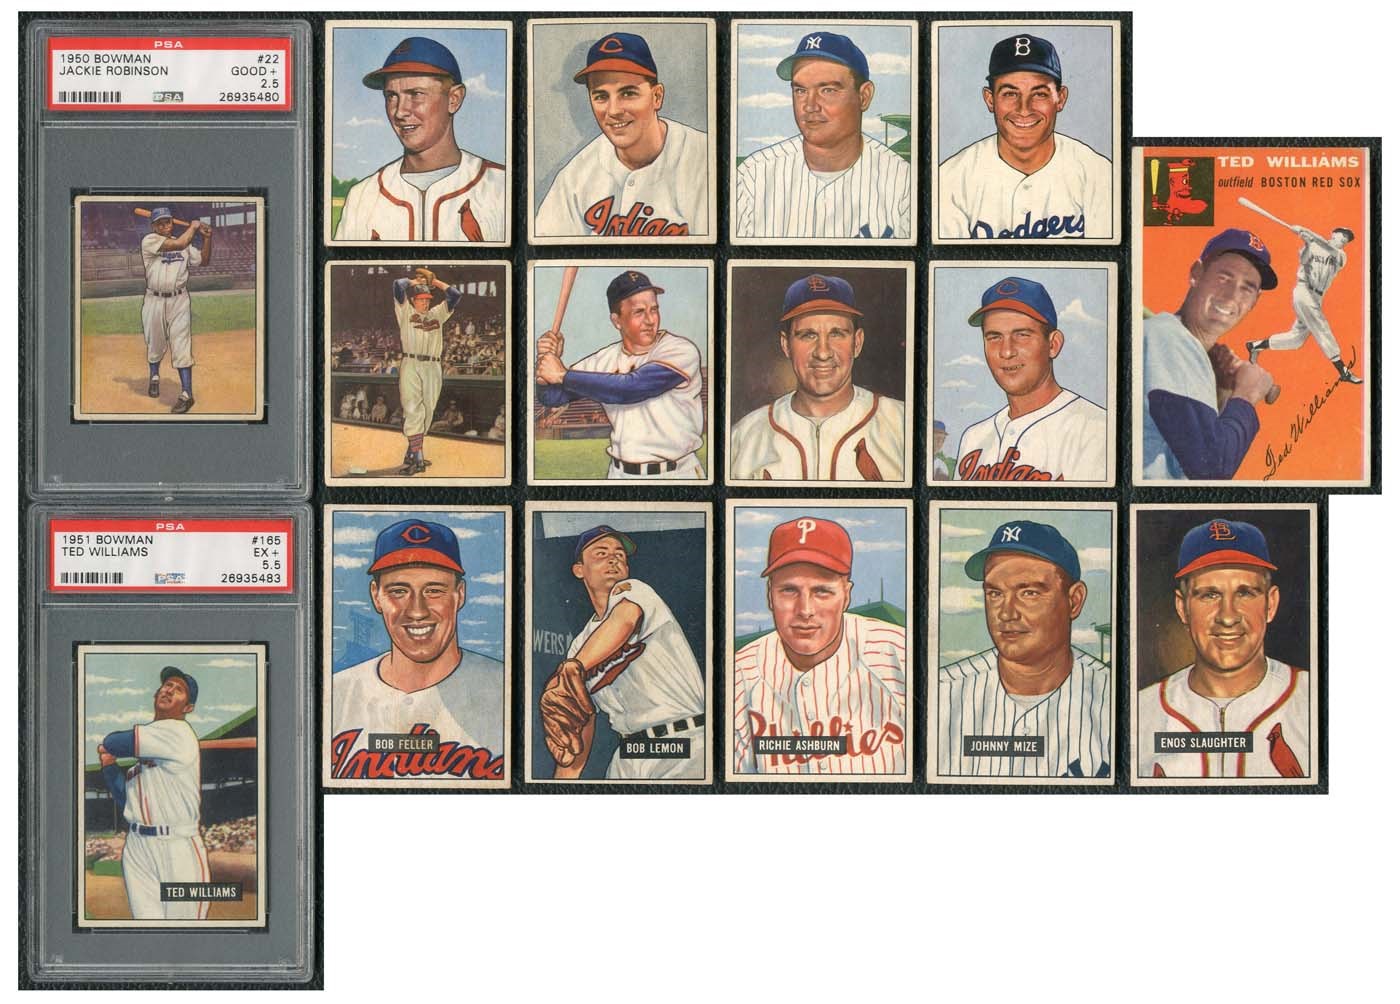 1934-1960 Topps, Bowman and Diamond Matchbook Collection with 33 HOFers (2 PSA Graded)!